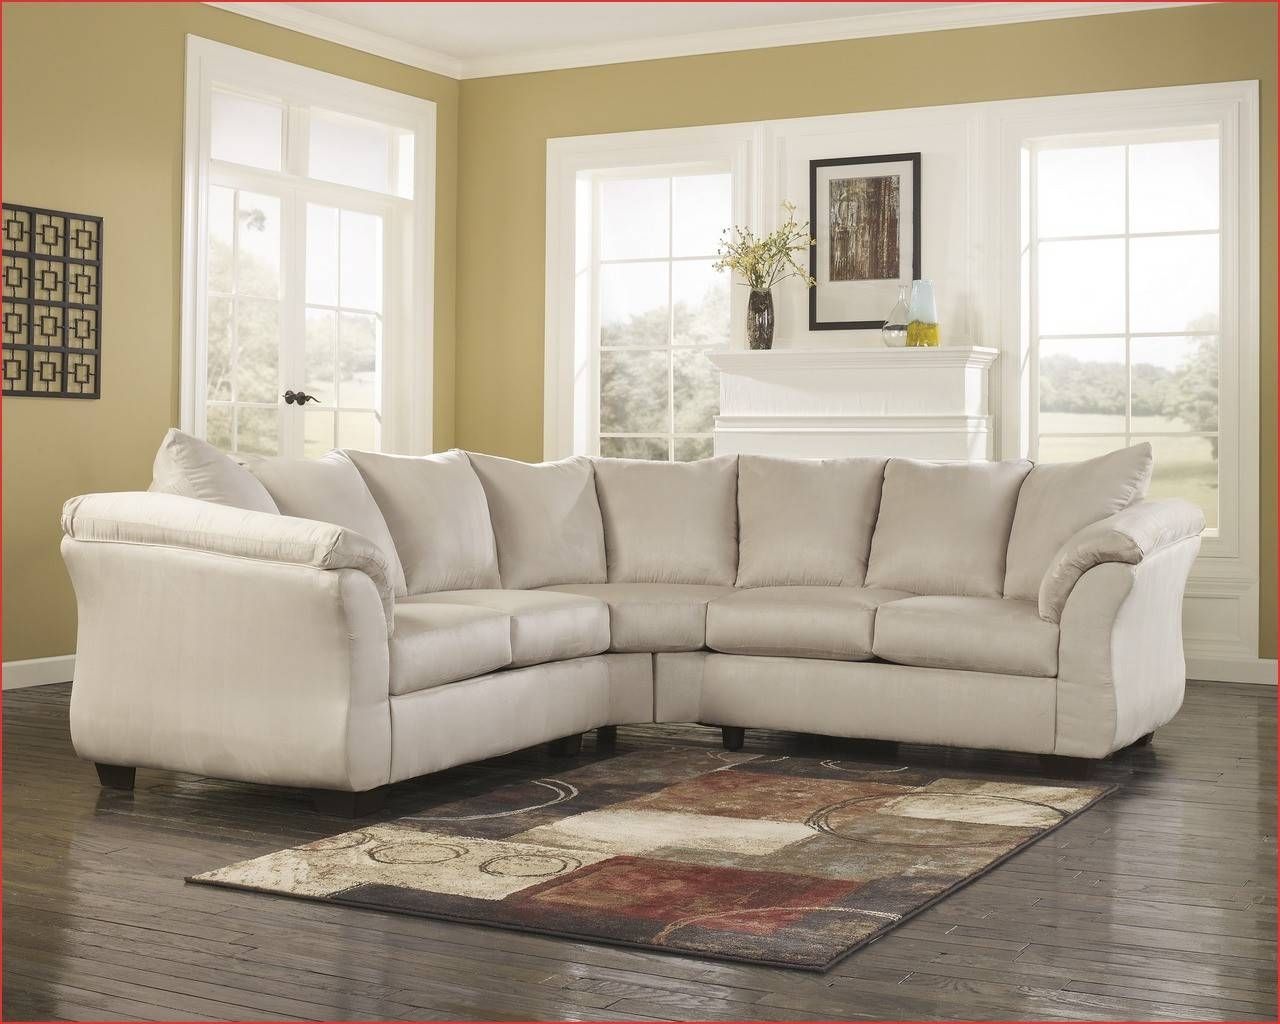 Sectional Sofas Rochester Ny Awesome Sectionals Sectional Pertaining To Rochester Sectional Sofas (View 11 of 15)